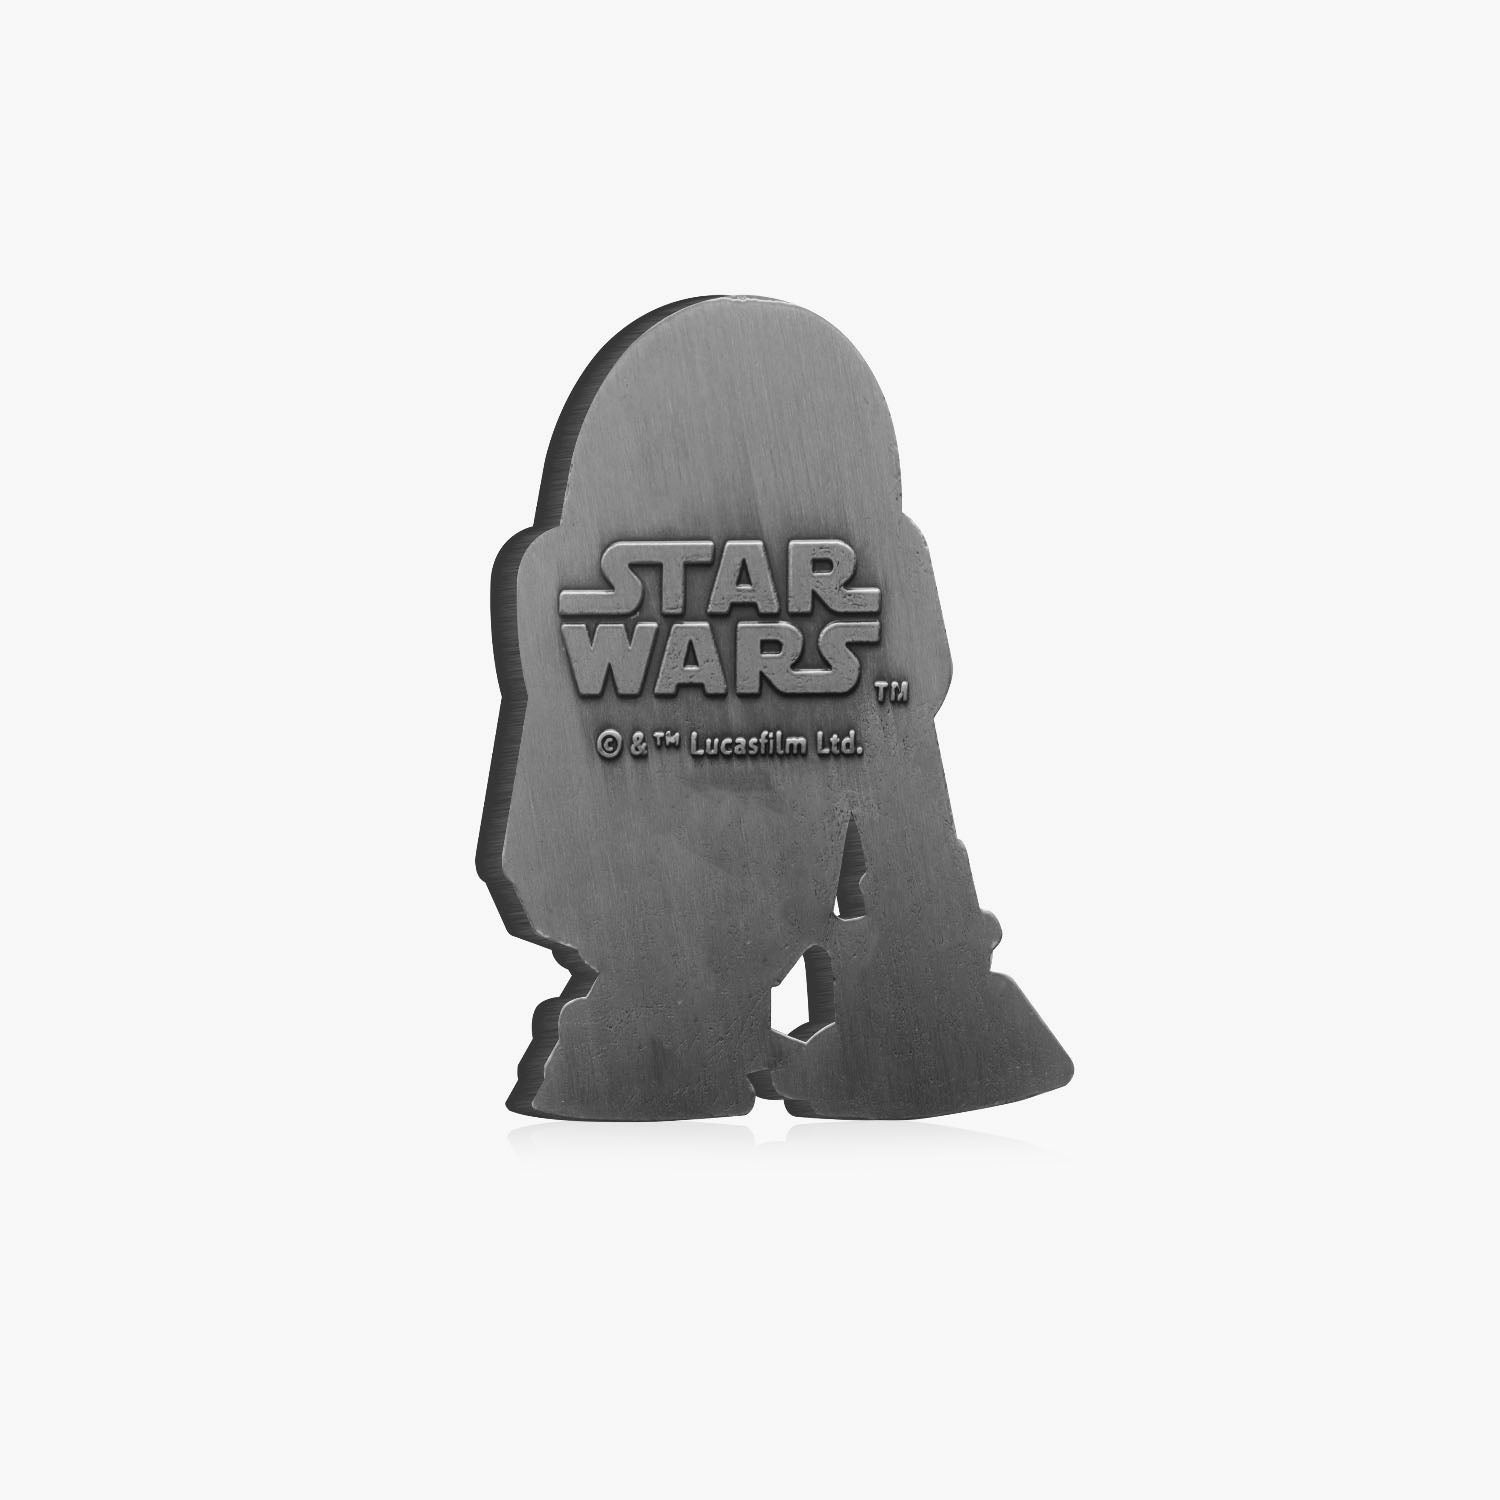 Official Star Wars R2D2 Shaped Commemorative